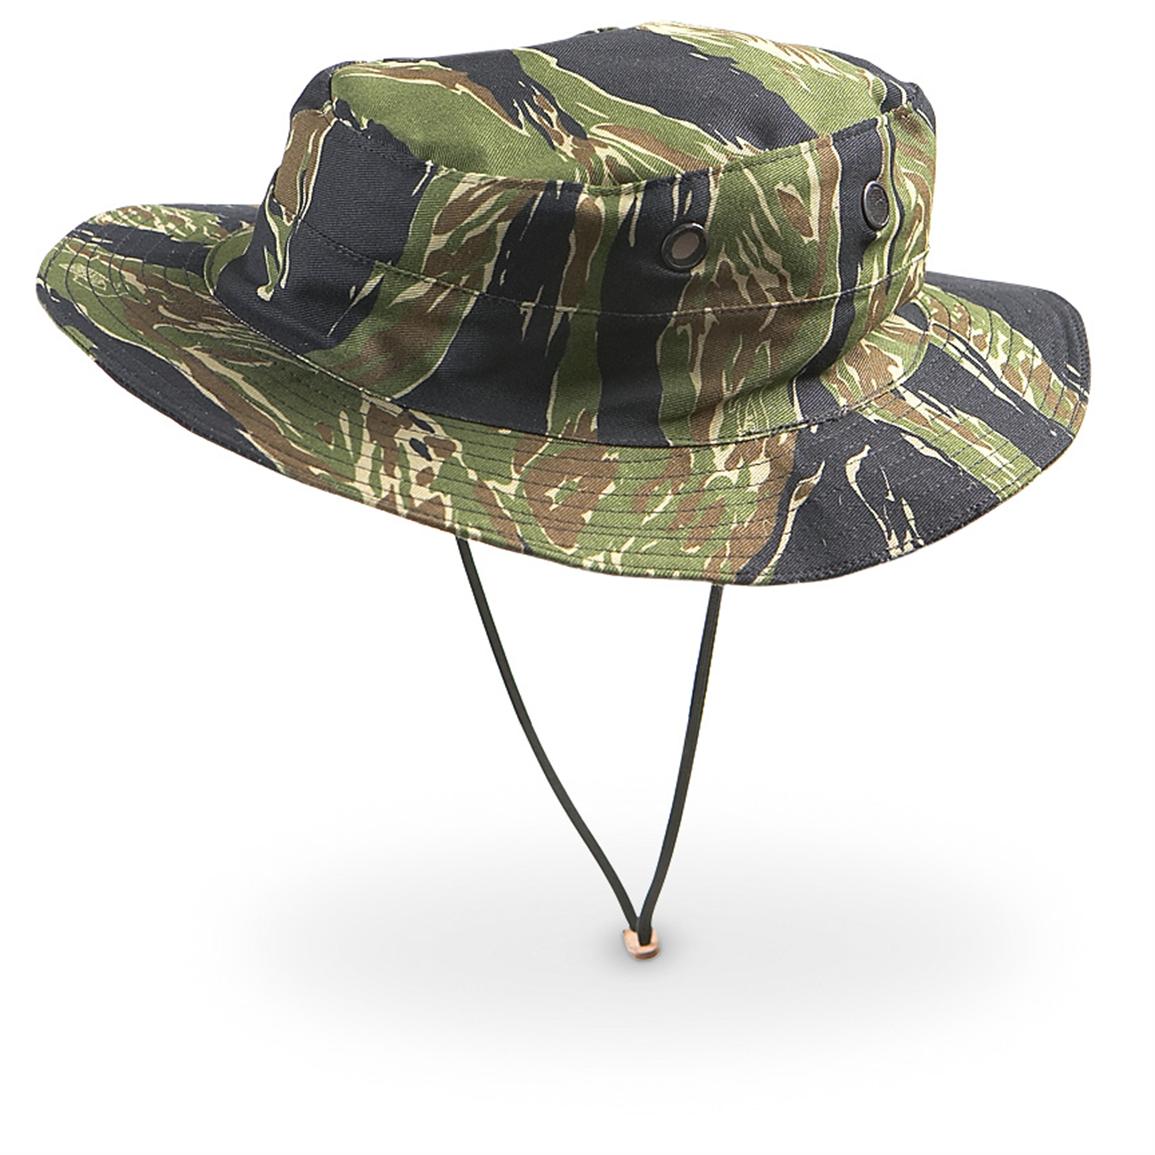 Advisor™ Tiger Stripe Boonie Hat - 158665, Hats & Caps at Sportsman's Guide